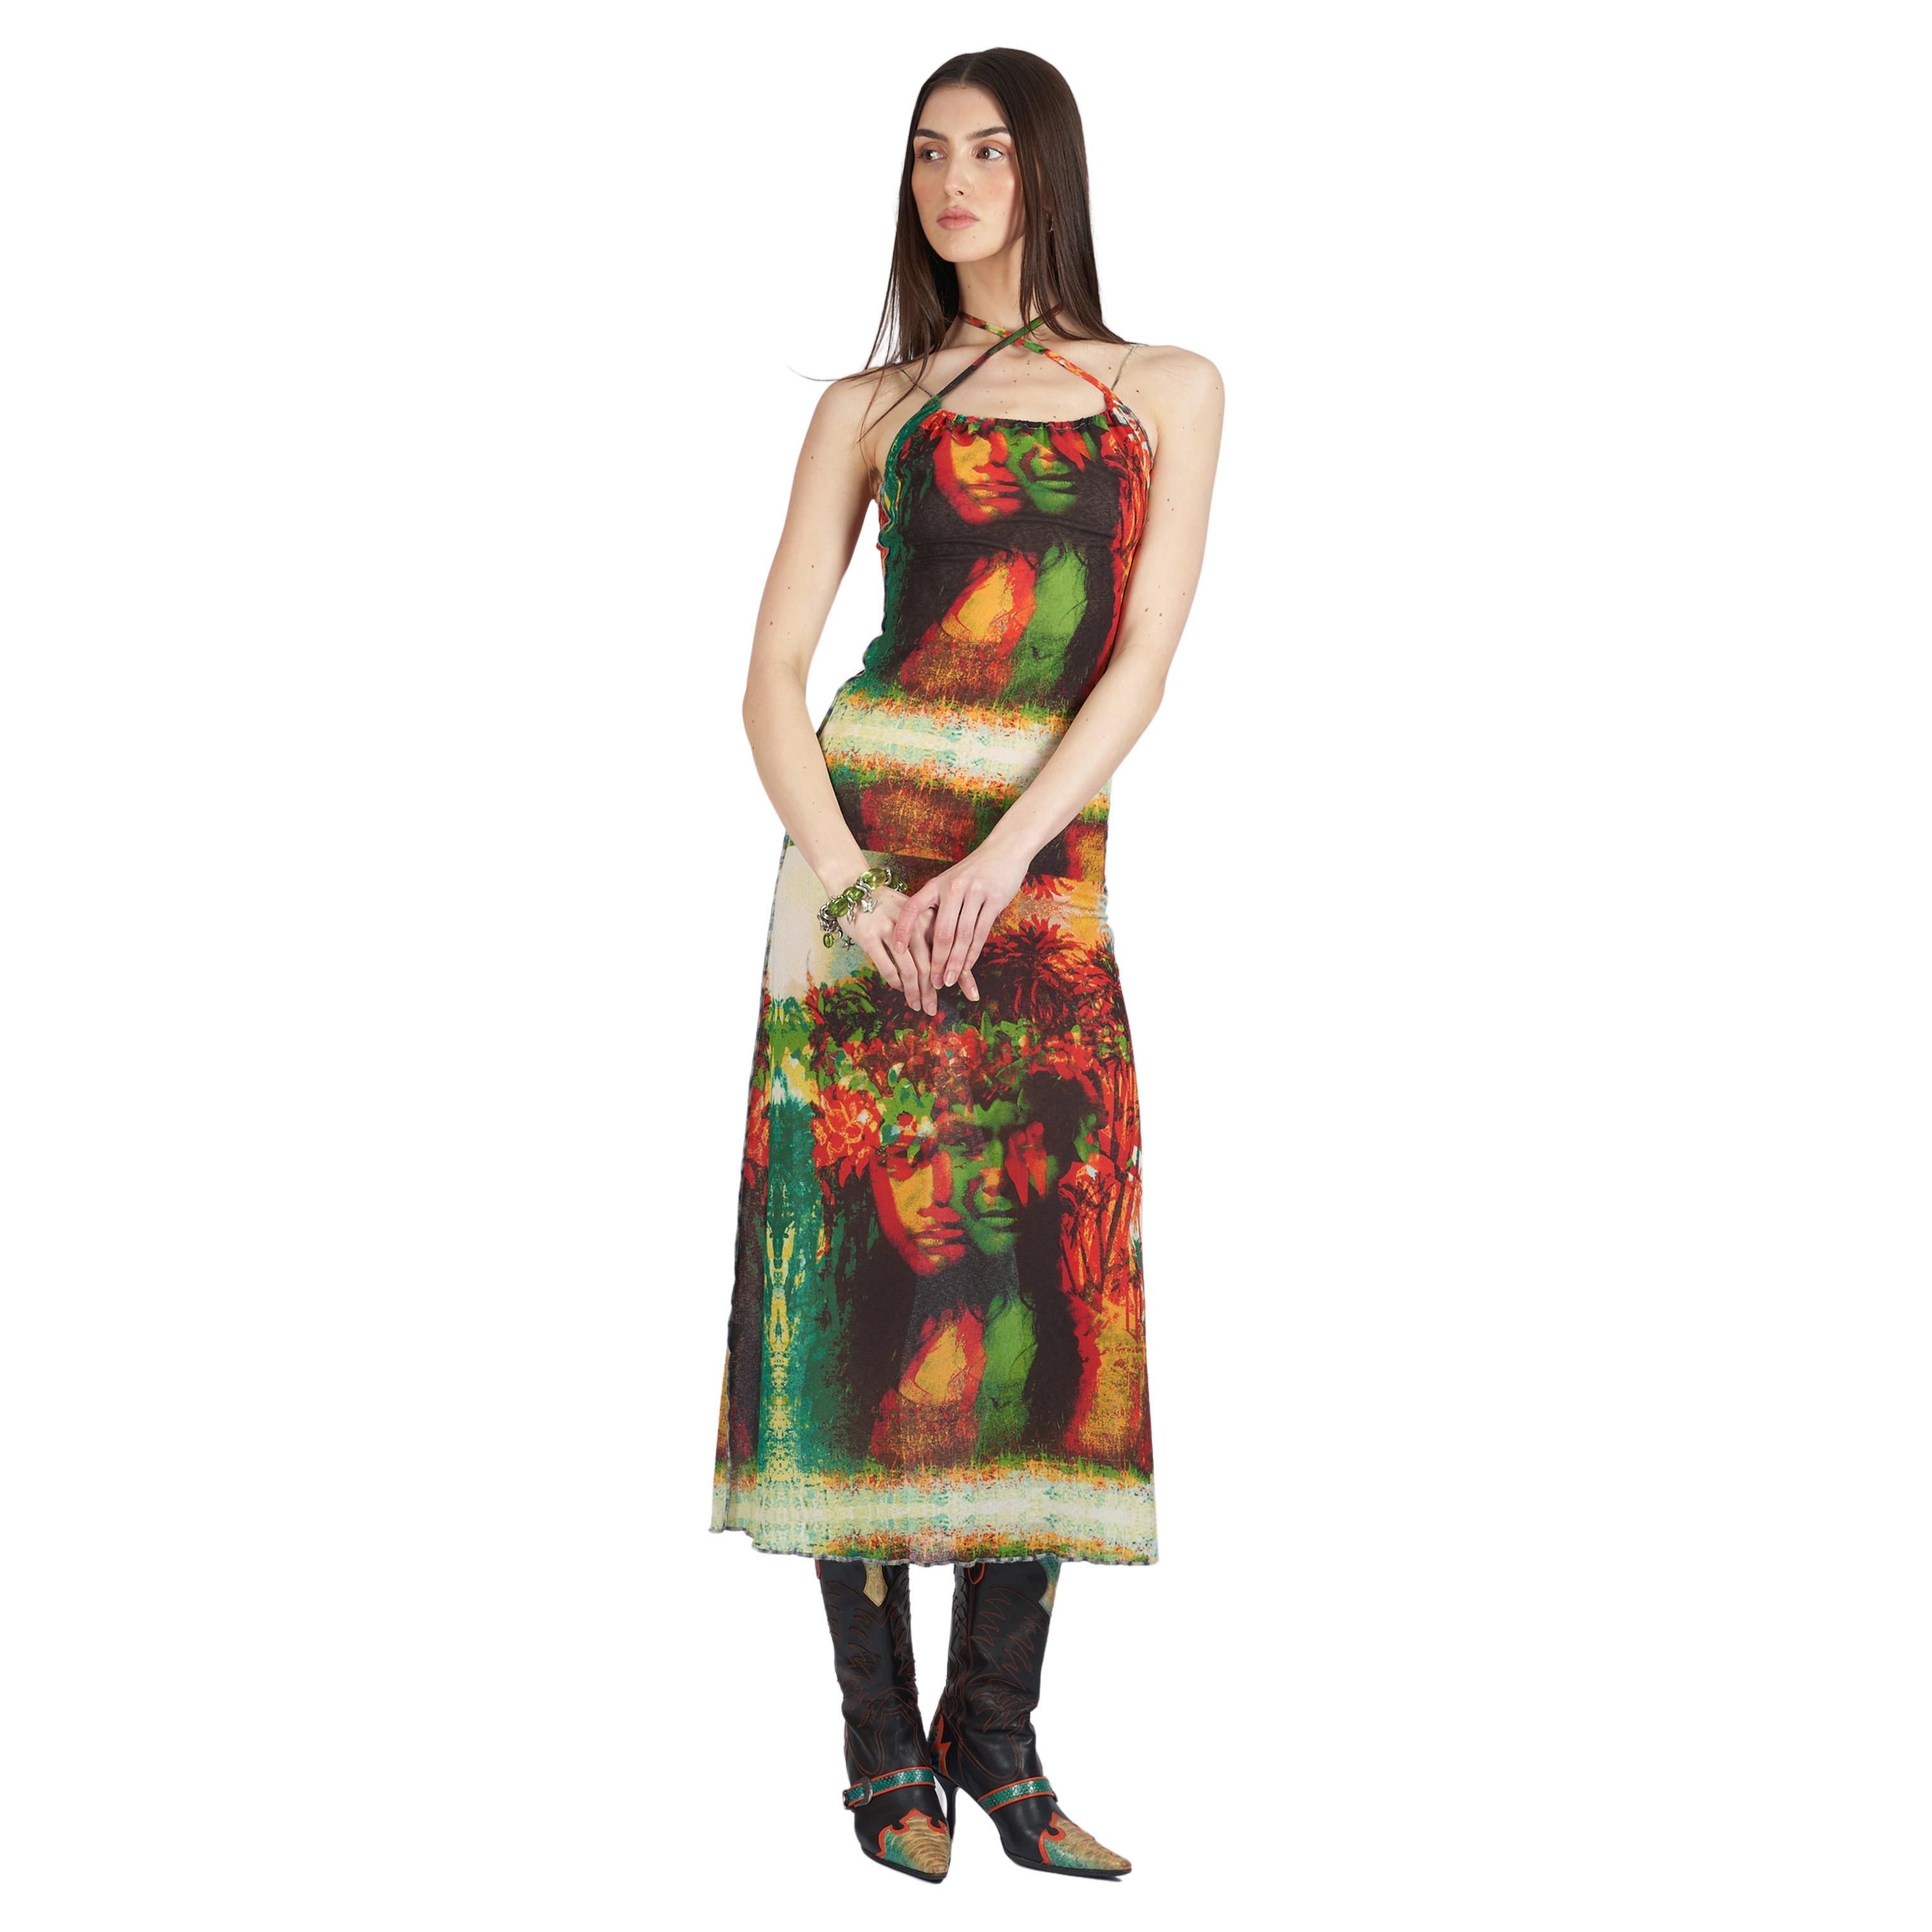 Vintage S/S 2000 Runway Psychedelic Faces Mesh Dress For Sale